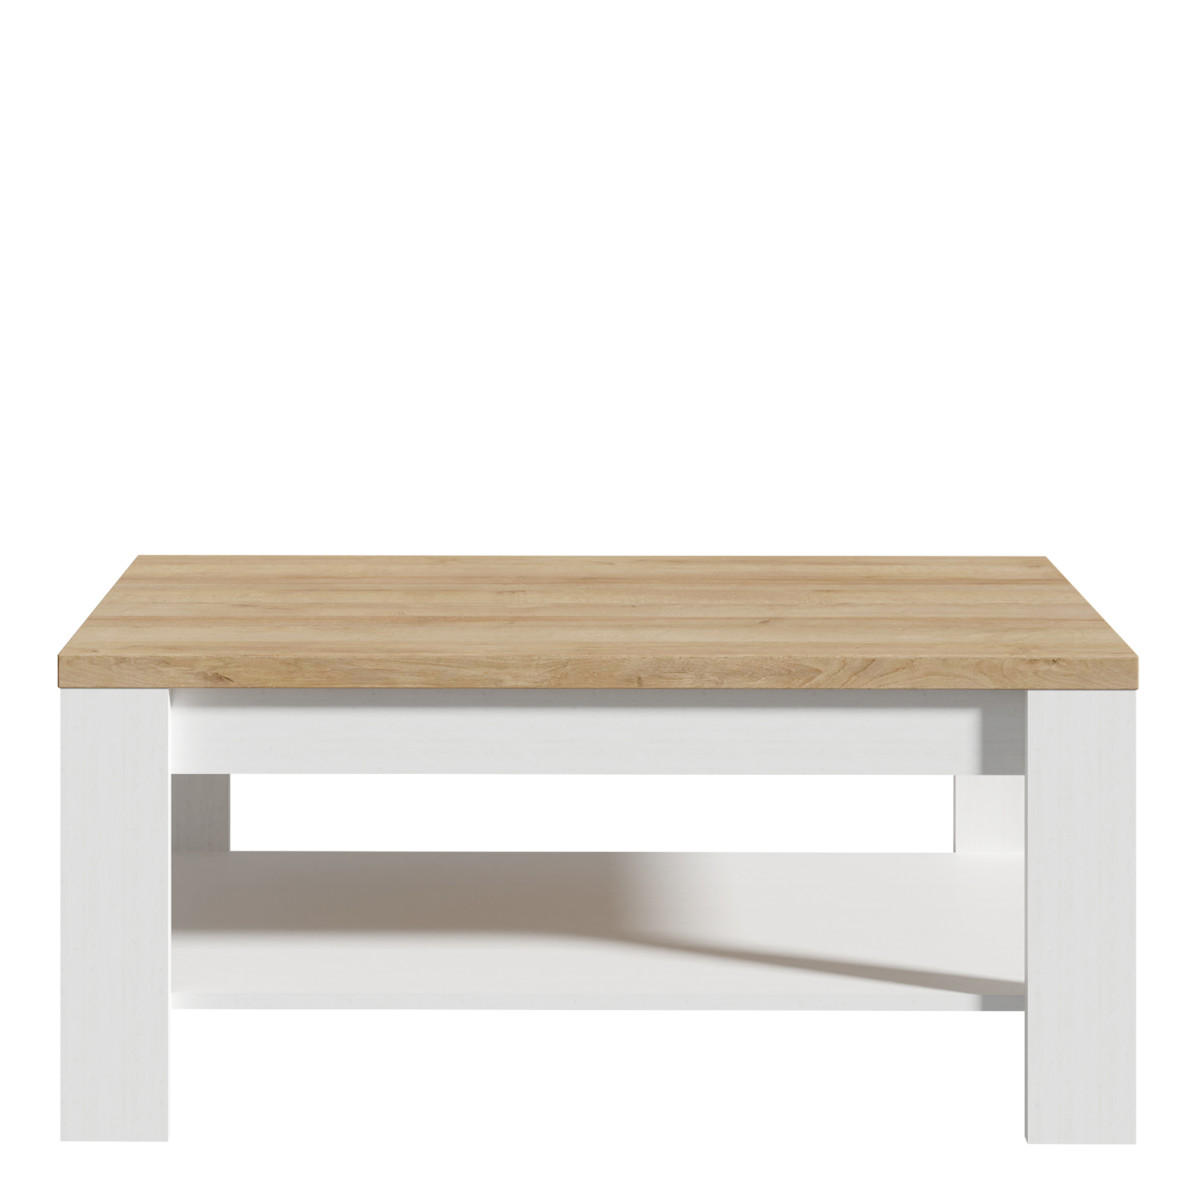 Bohol Coffee Table in Riviera Oak and White